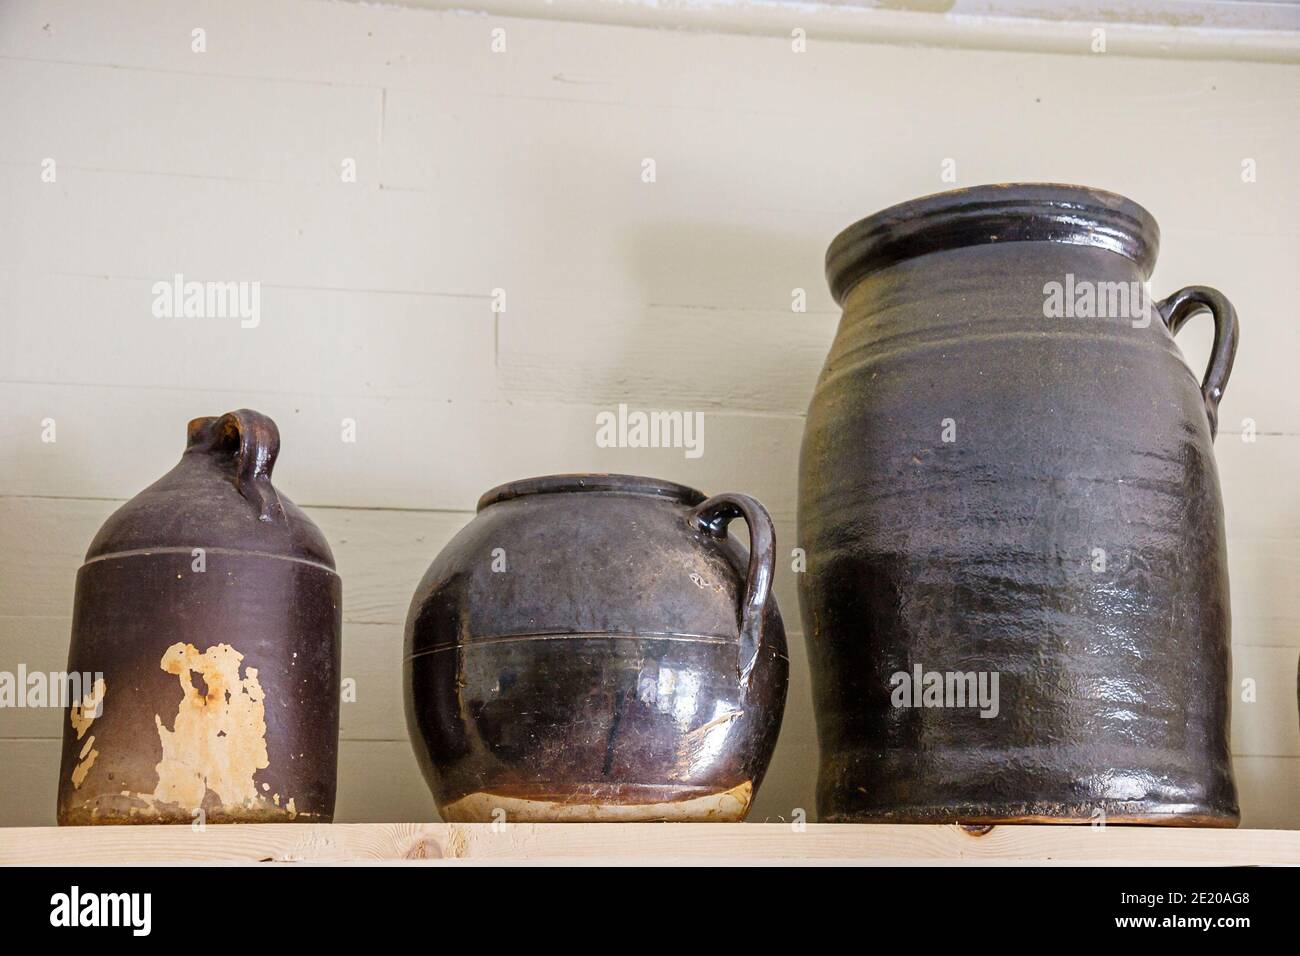 Alabama Monroeville Pottery by Williams antique jugs, Stock Photo